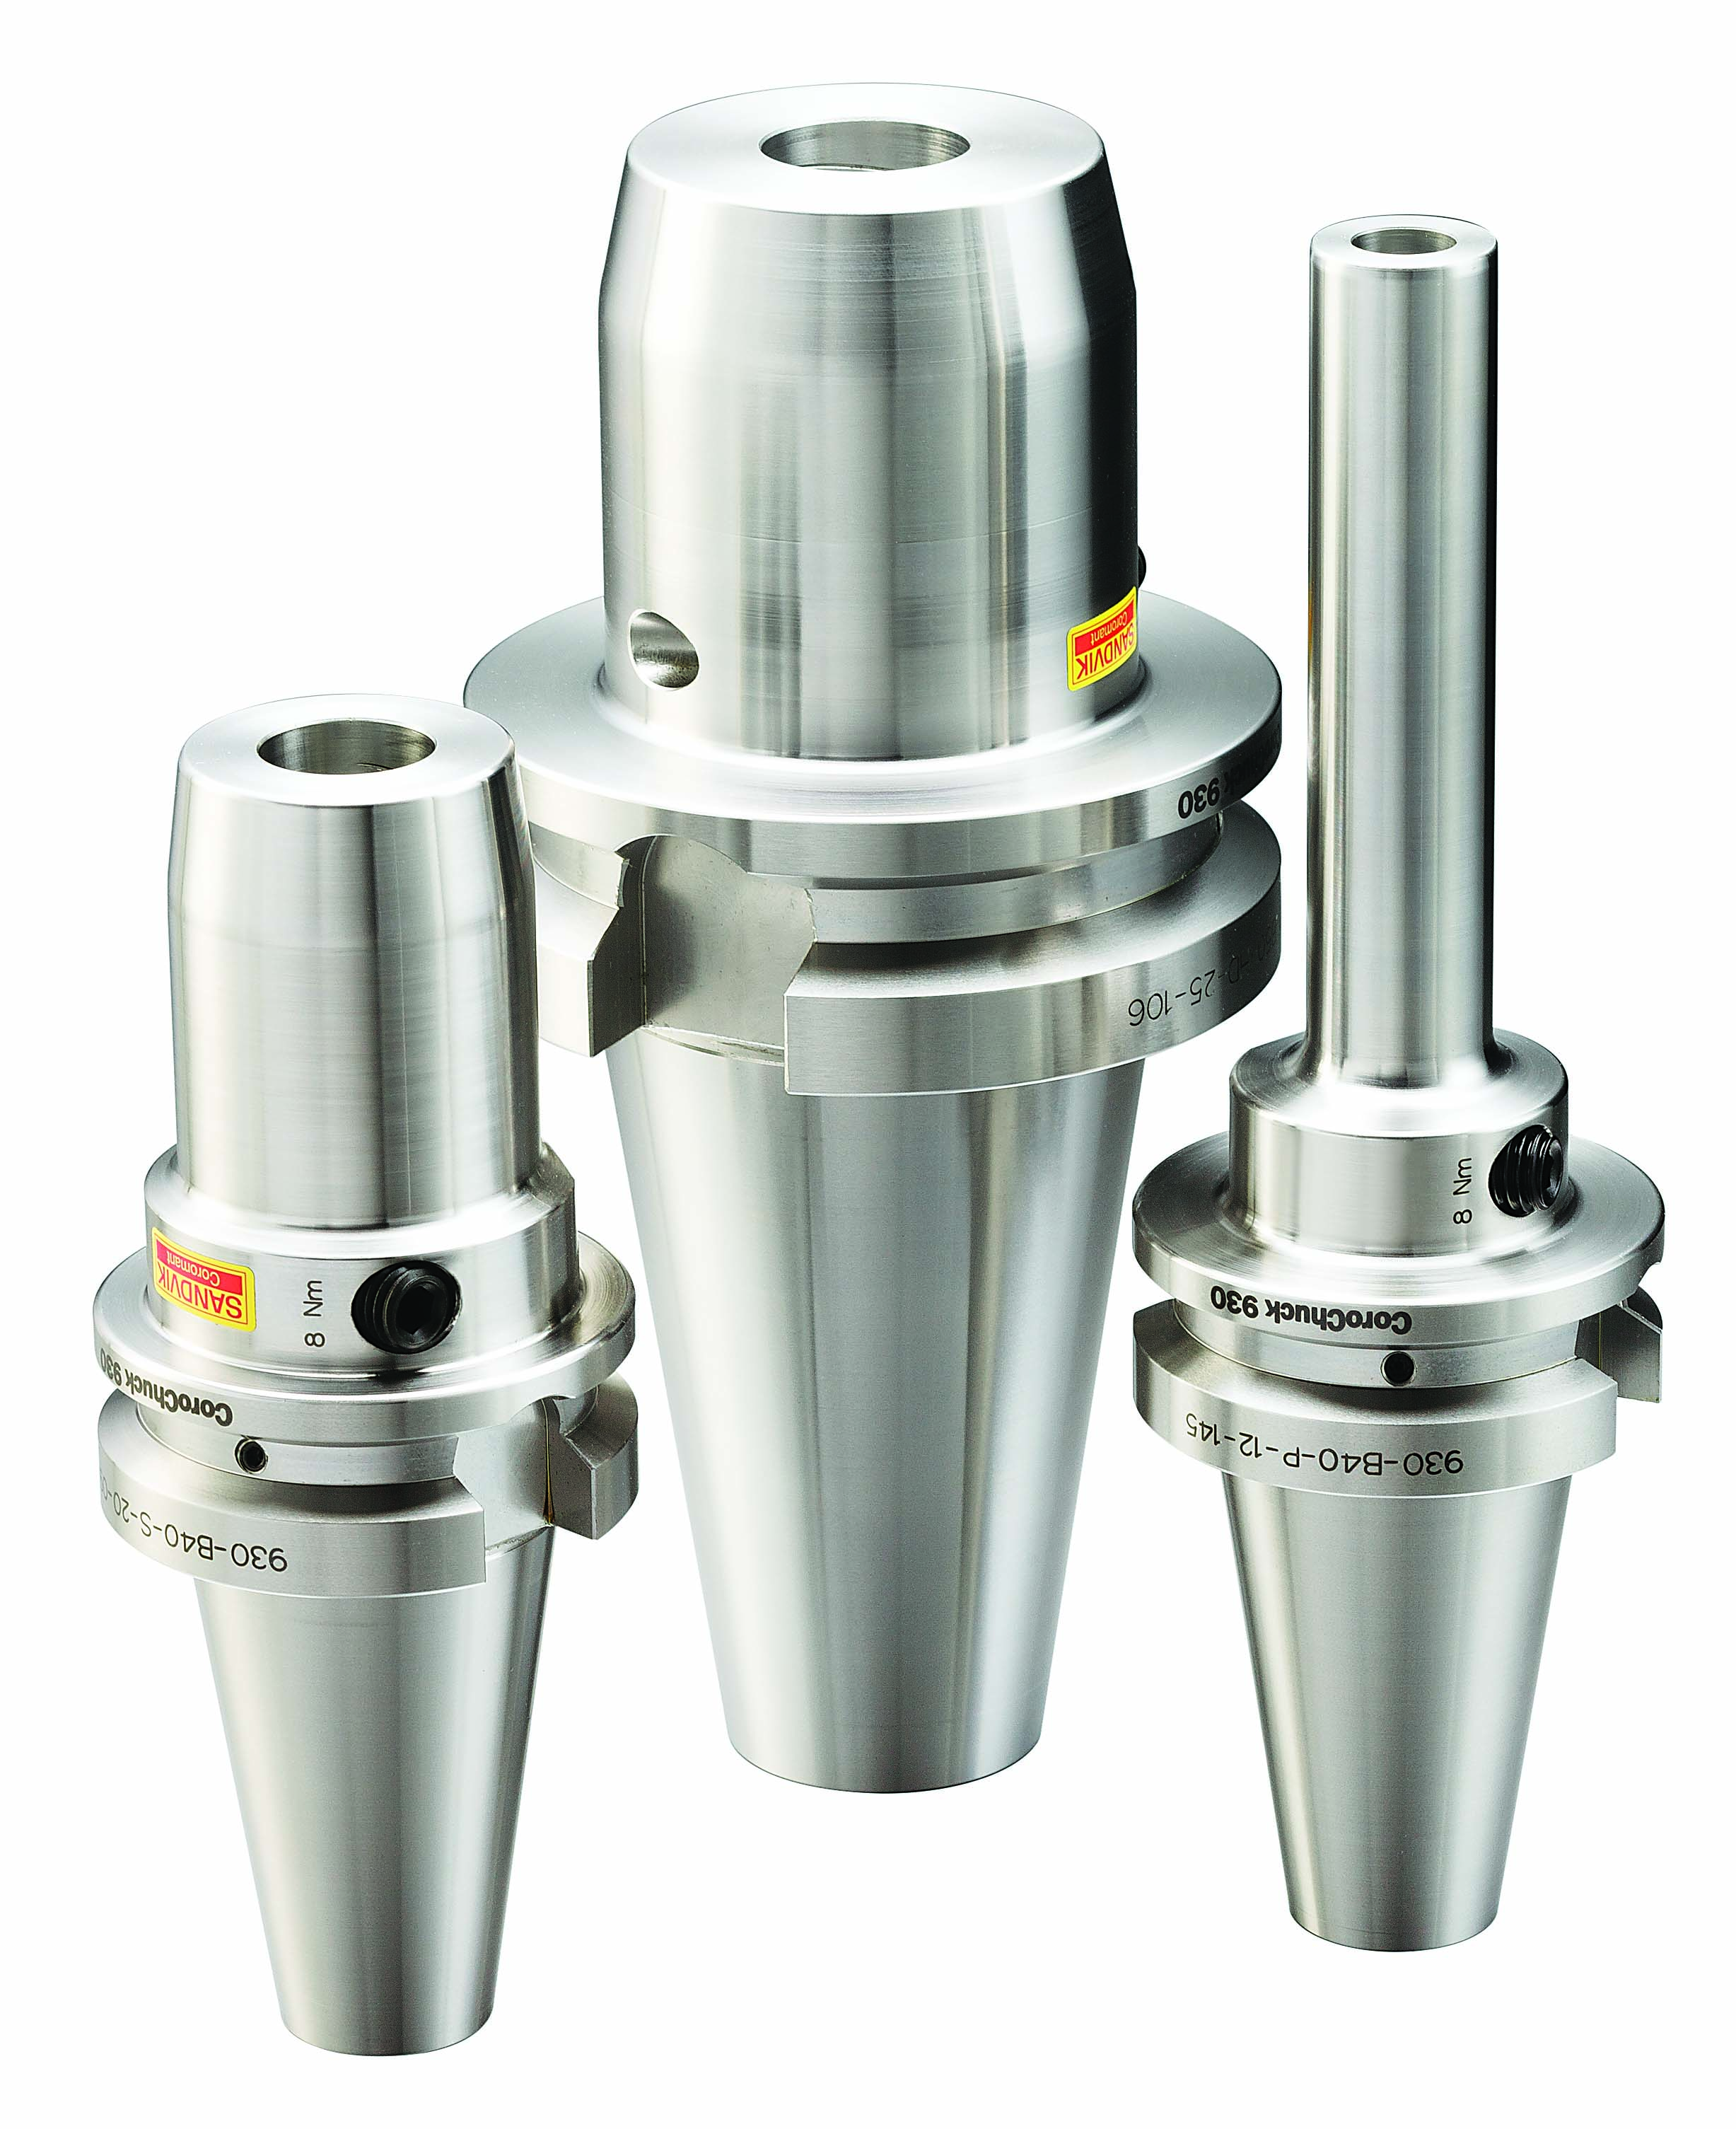 Top-performing toolholders offer high accuracy and repeatability to achieve consistent results over time. Look for designs that incorporate precision mating surfaces and close tolerance dimensions